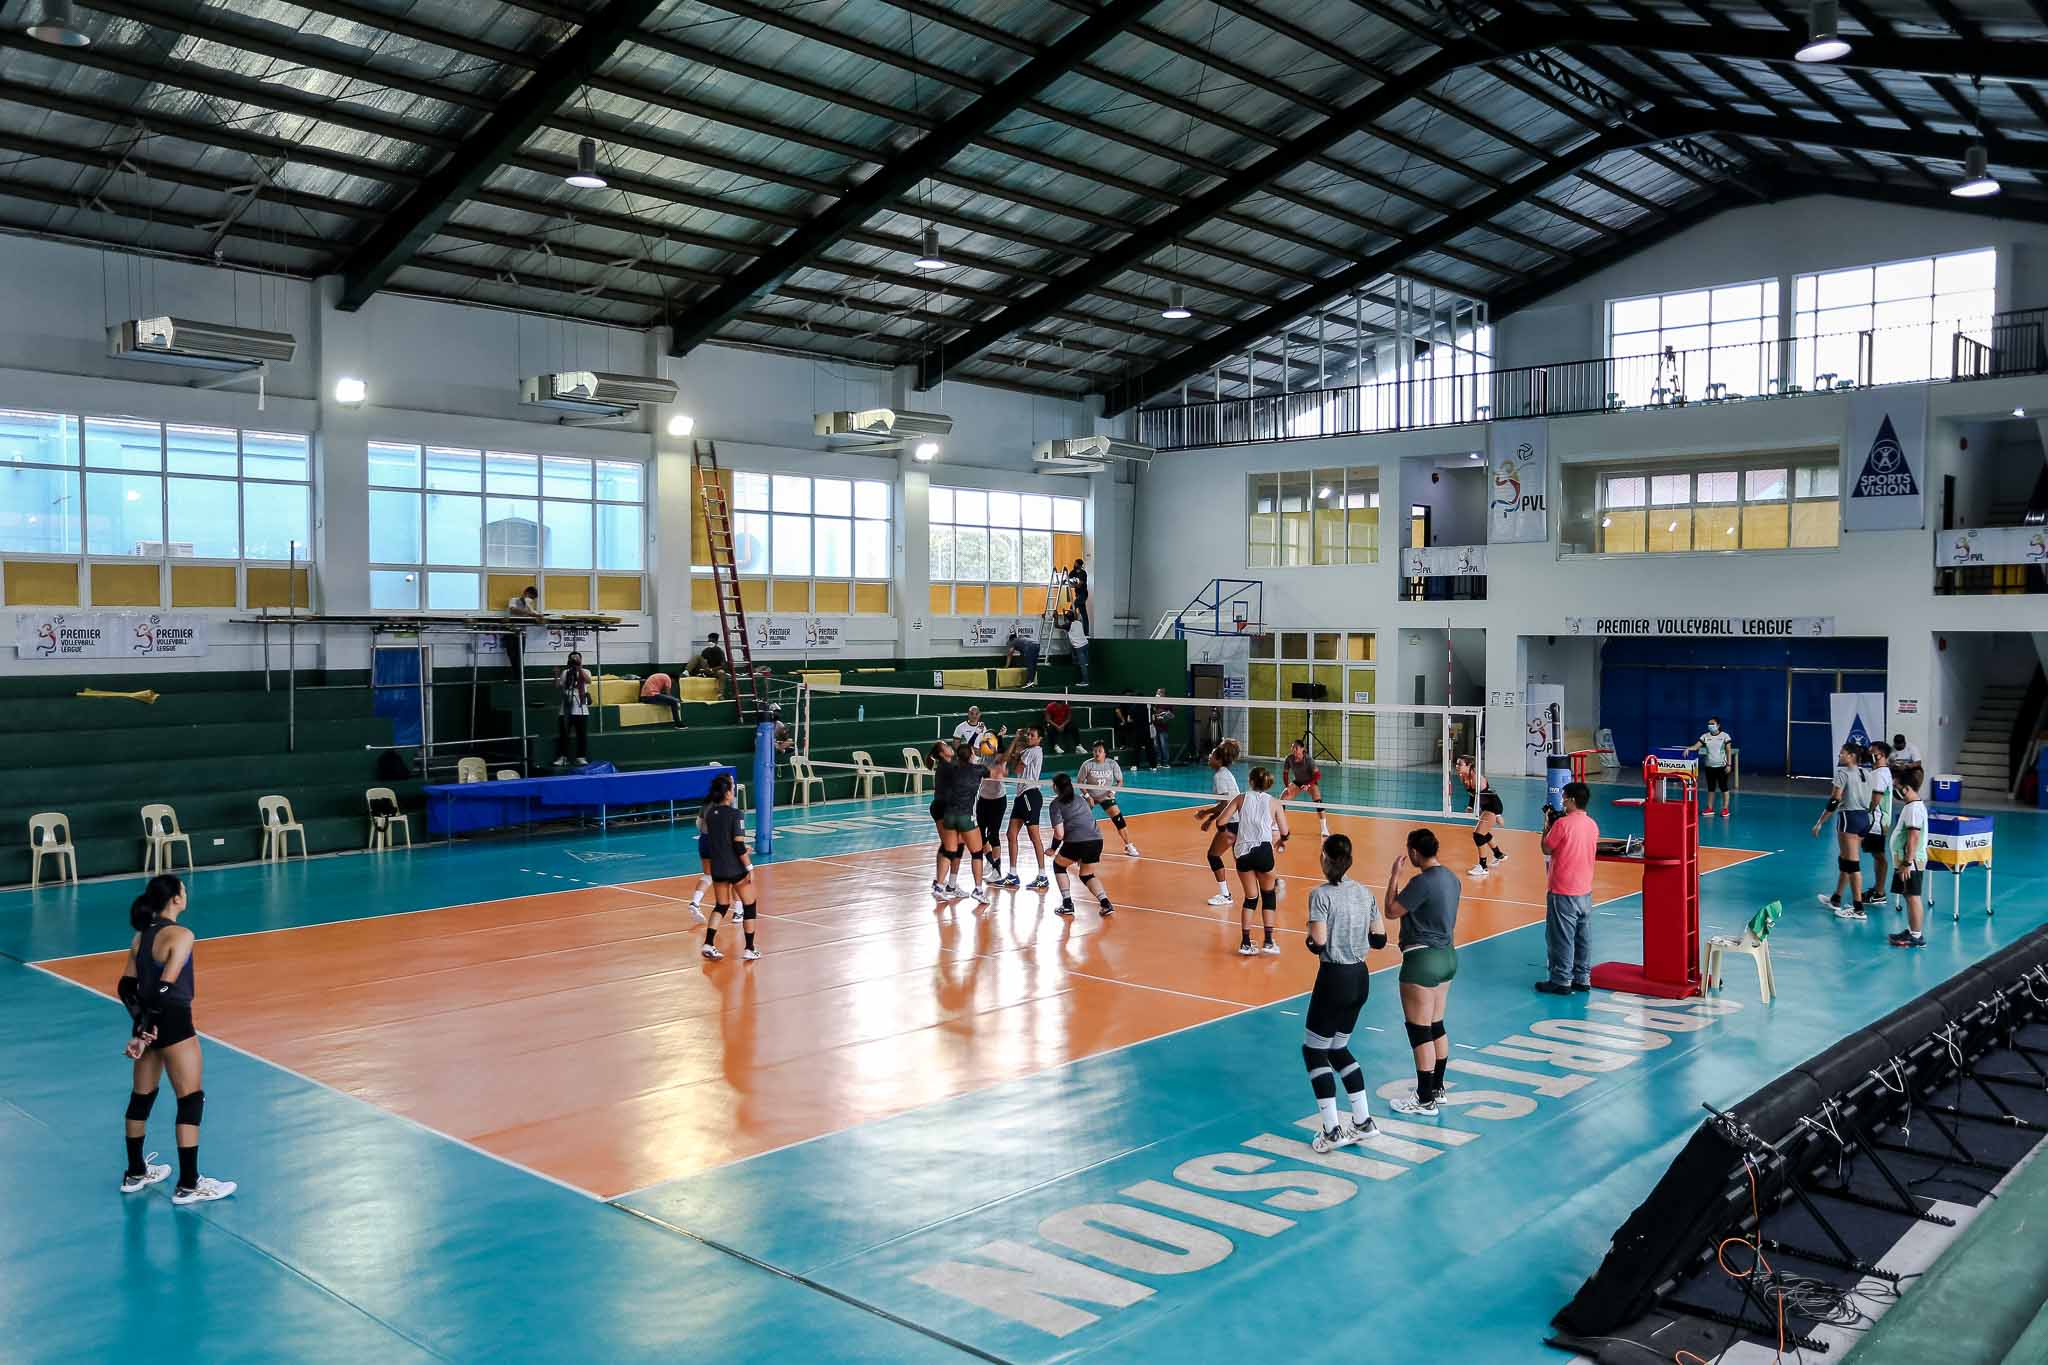 Venue for the PVL Open Conference. PVL PHOTO